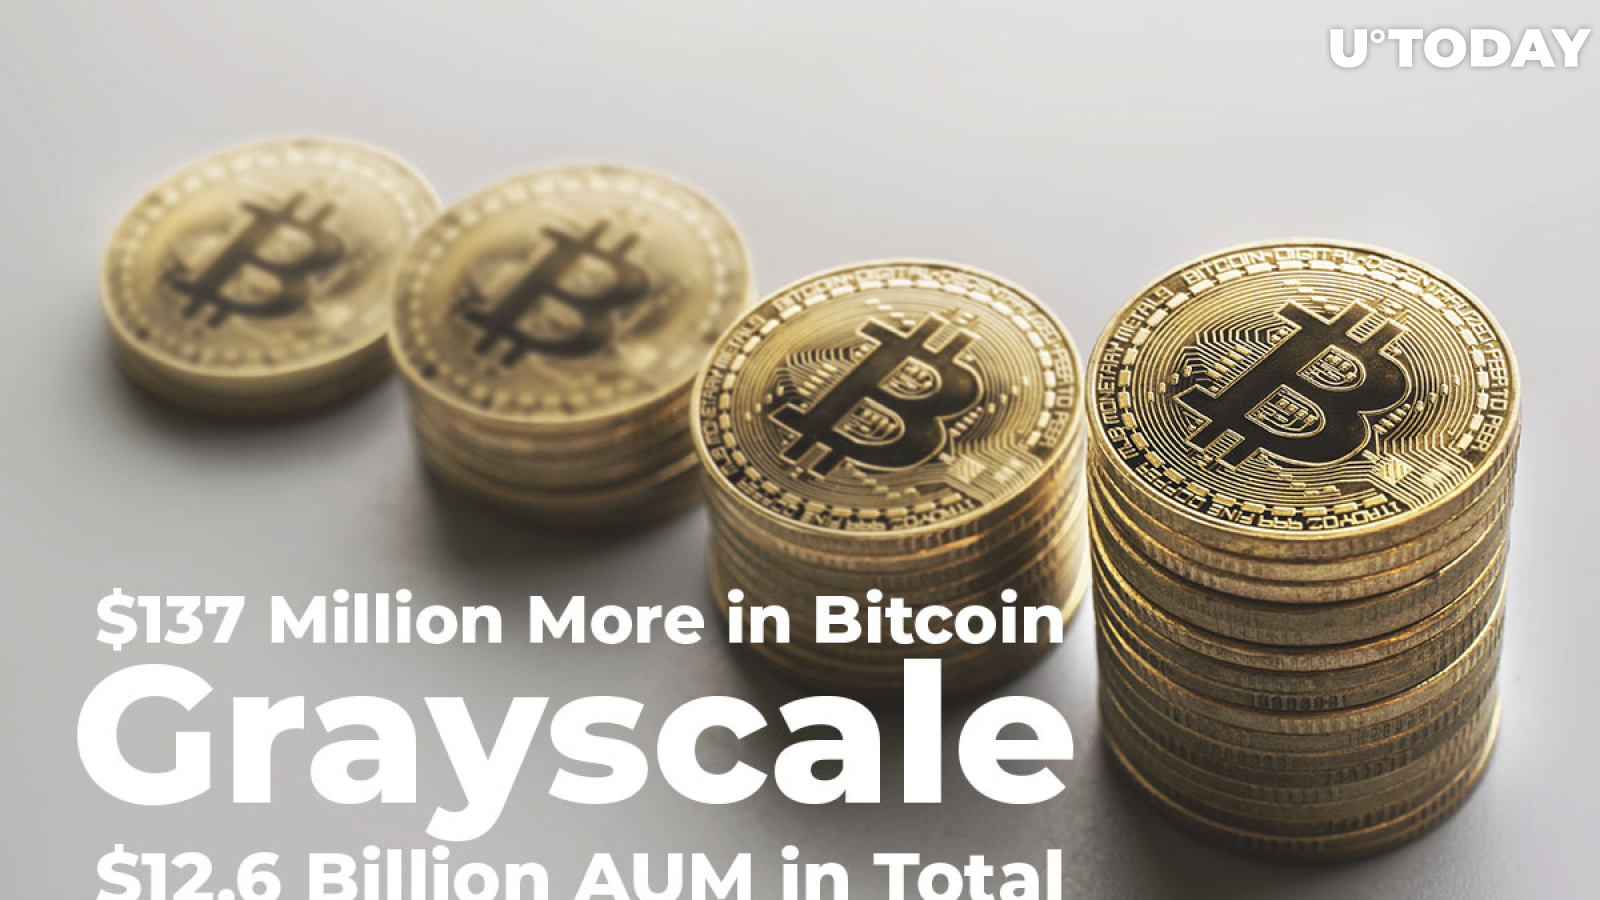 Grayscale Absorbs $137 Million More in Bitcoin in Last 24 Hours, $12.6 Billion AUM in Total